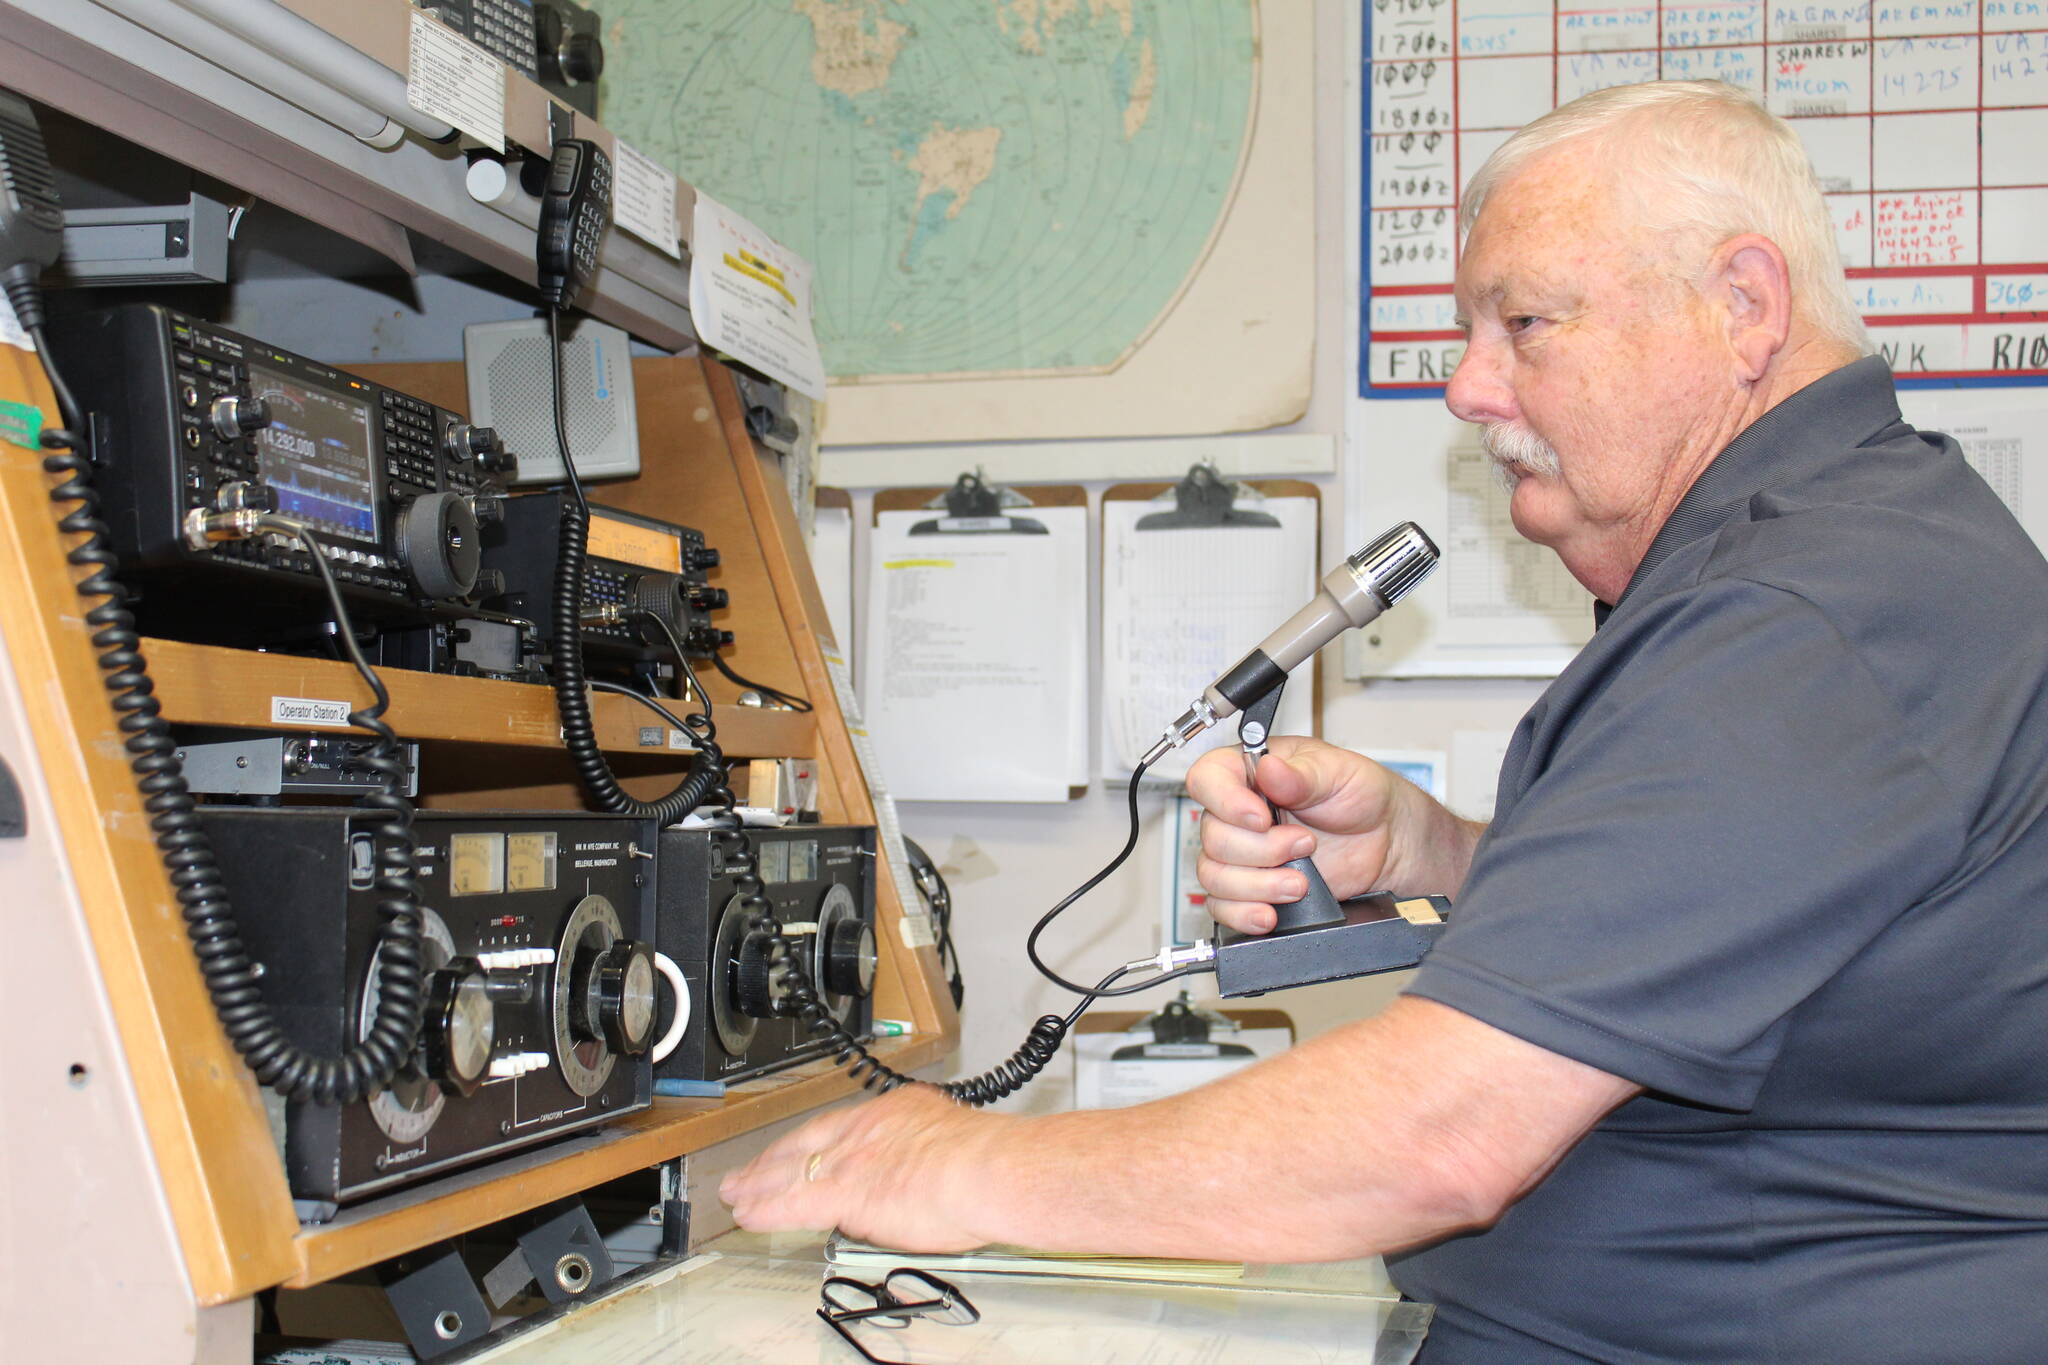 Terry Sparks uses the high-frequency radio at the NAS Whidbey Island Military Auxiliary Radio Service Station. (Photo by Karina Andrew/Whidbey News-Times)